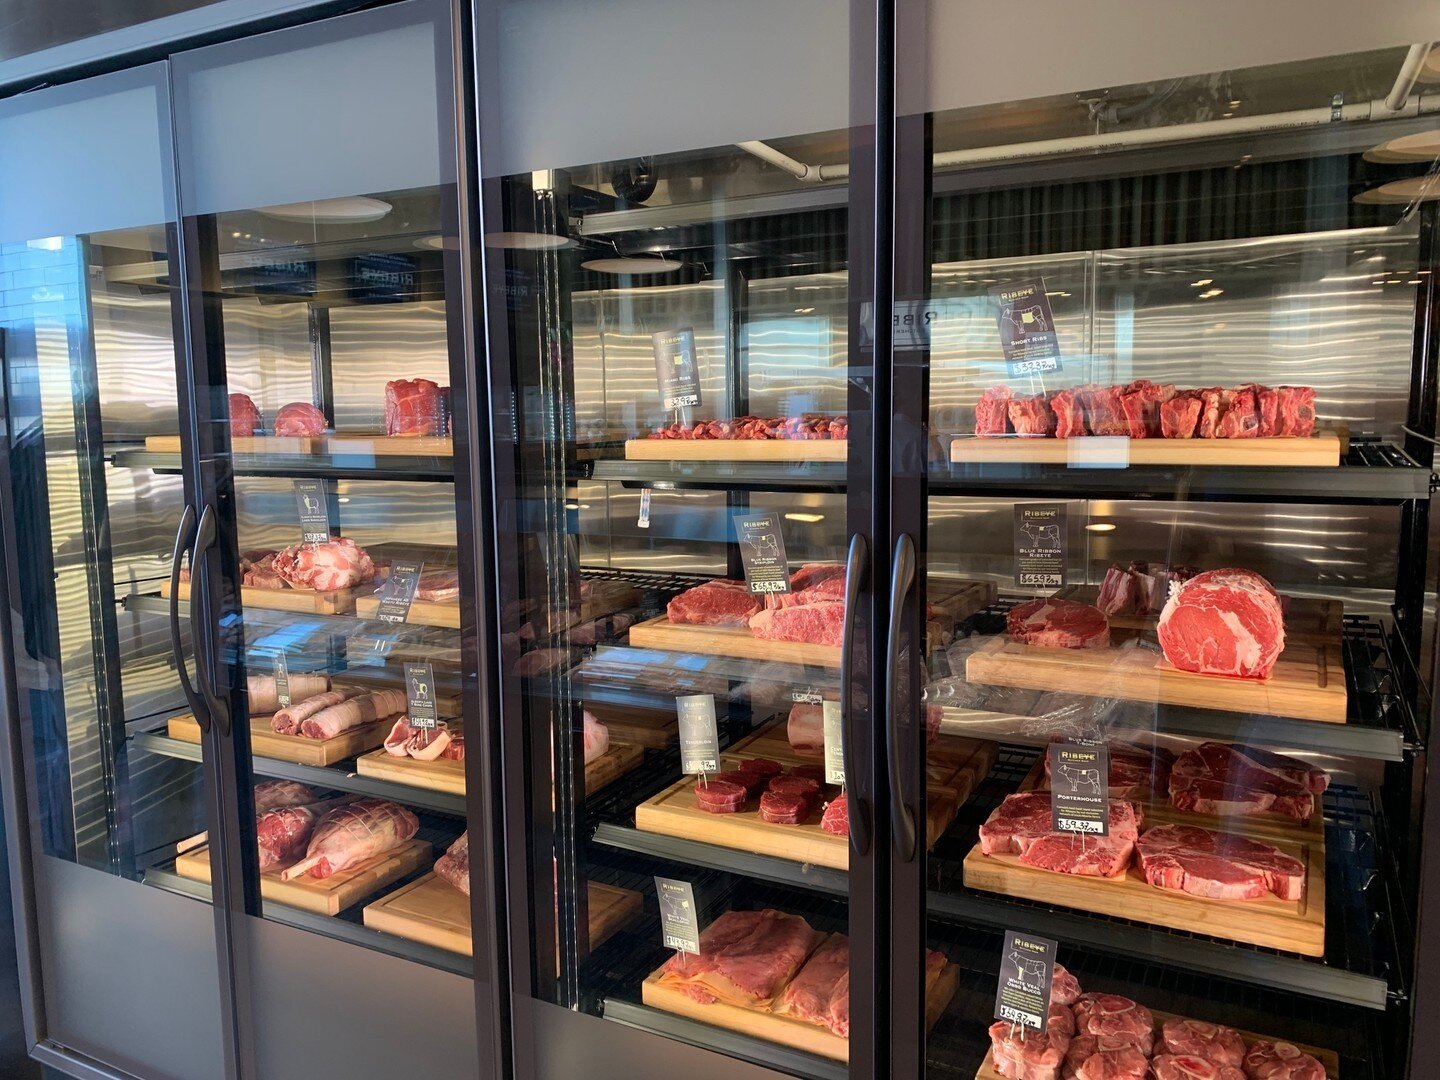 Hey Edmonton and area! rok Glacier Water is now proudly featured at Alberta&rsquo;s newest premier boutique butcher shop,  Ribeye Butcher Shop! ⁠
⁠
Located at 335 - 935 St. Albert Trail their knowledgeable team pride themselves on bringing back class